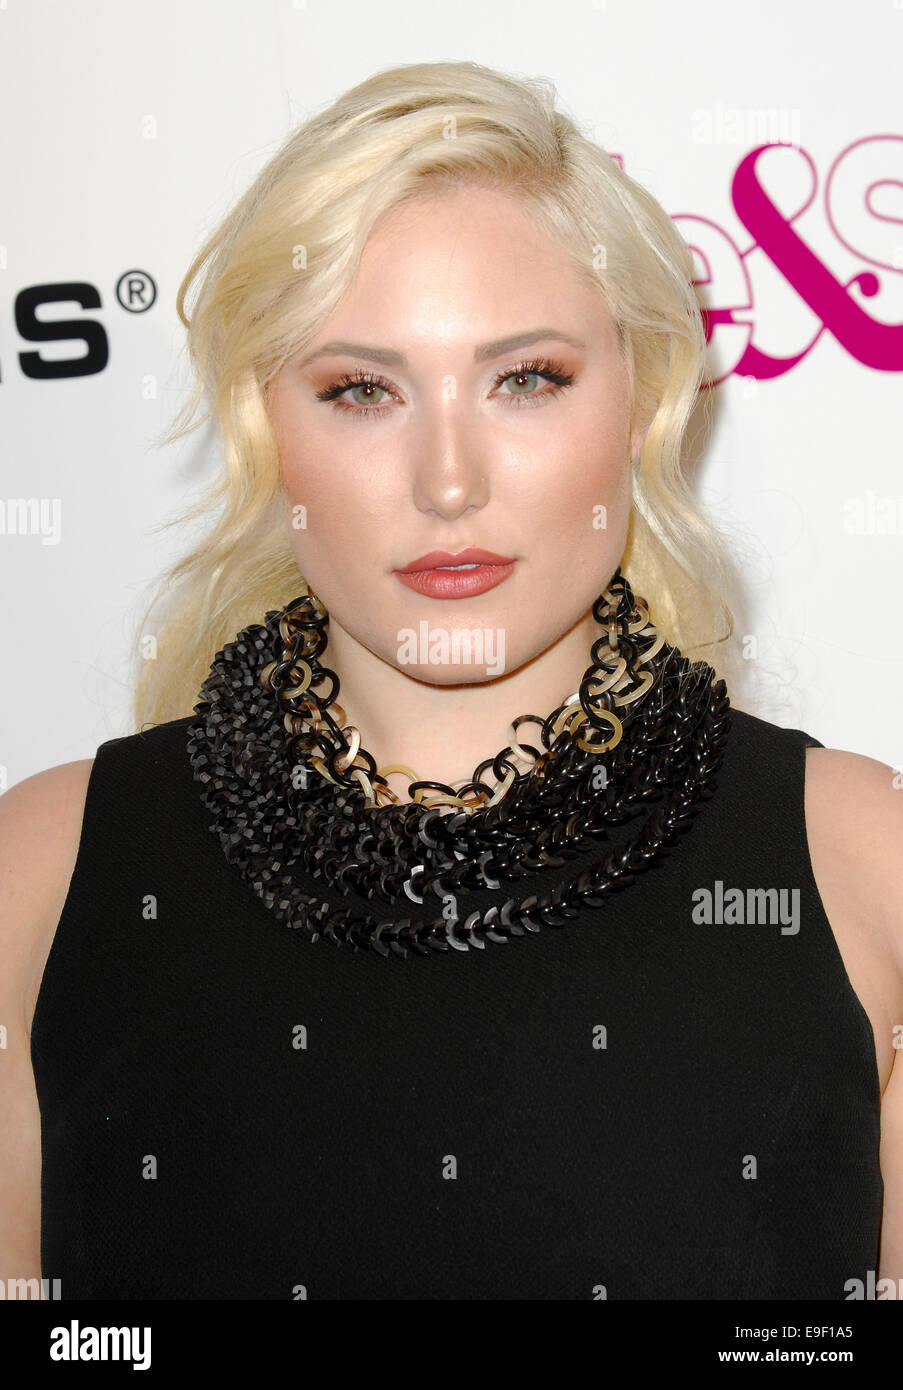 Hayley Hasselhoff LIFE & STYLE 10 YEAR ANNIVERSARY EVENT 2014.24.10 Hollywood/picture alliance Stock Photo